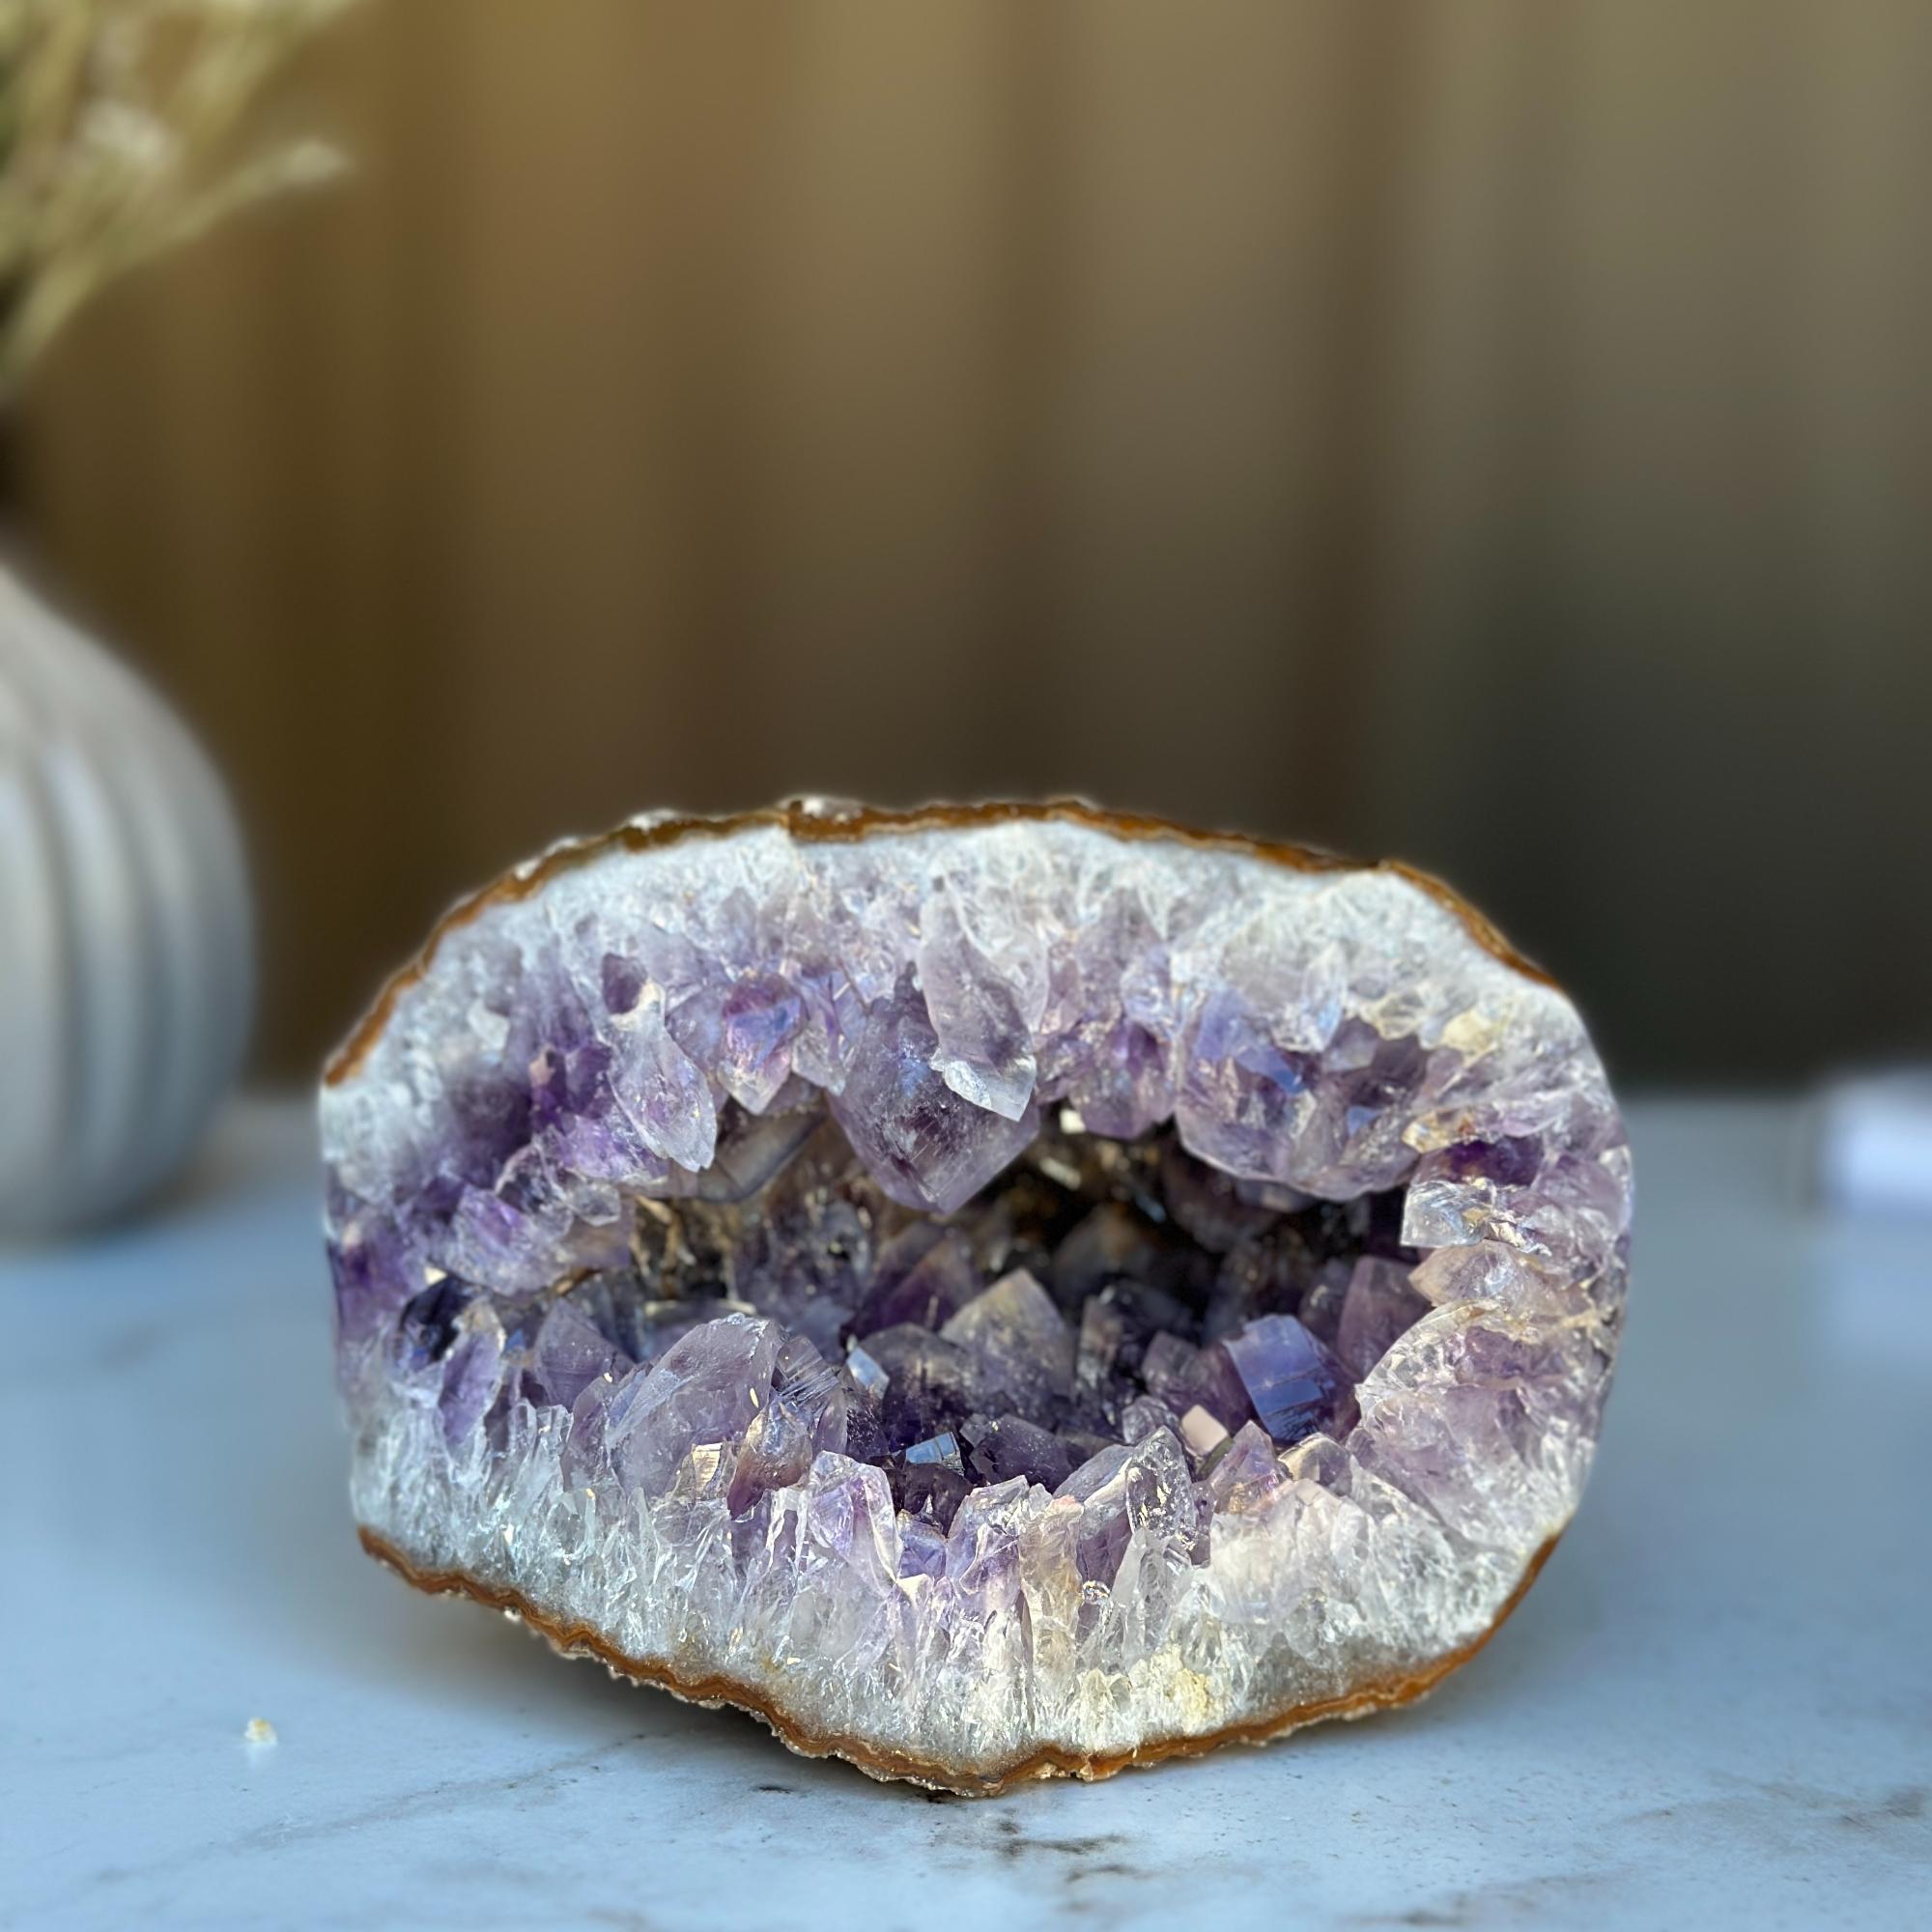 Amethyst Cave Geode with Agate Formations, Home Decor Crystal, High Quality Quartz Cluster